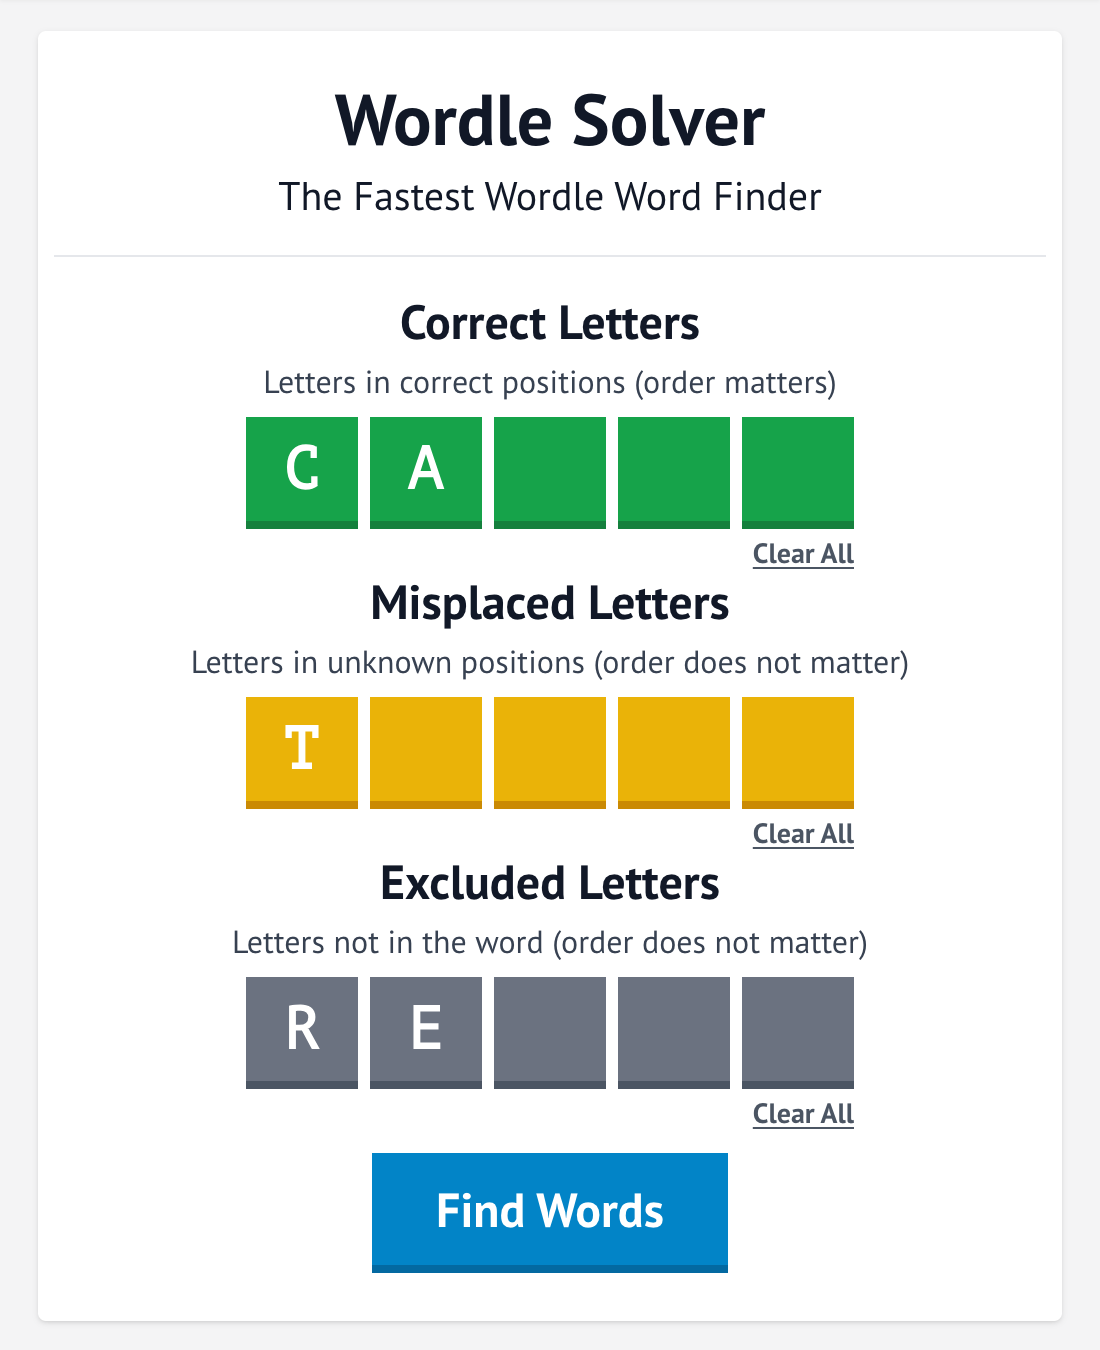 Quordle: The Addictive Word Puzzle Game That's Taking the Internet by Storm